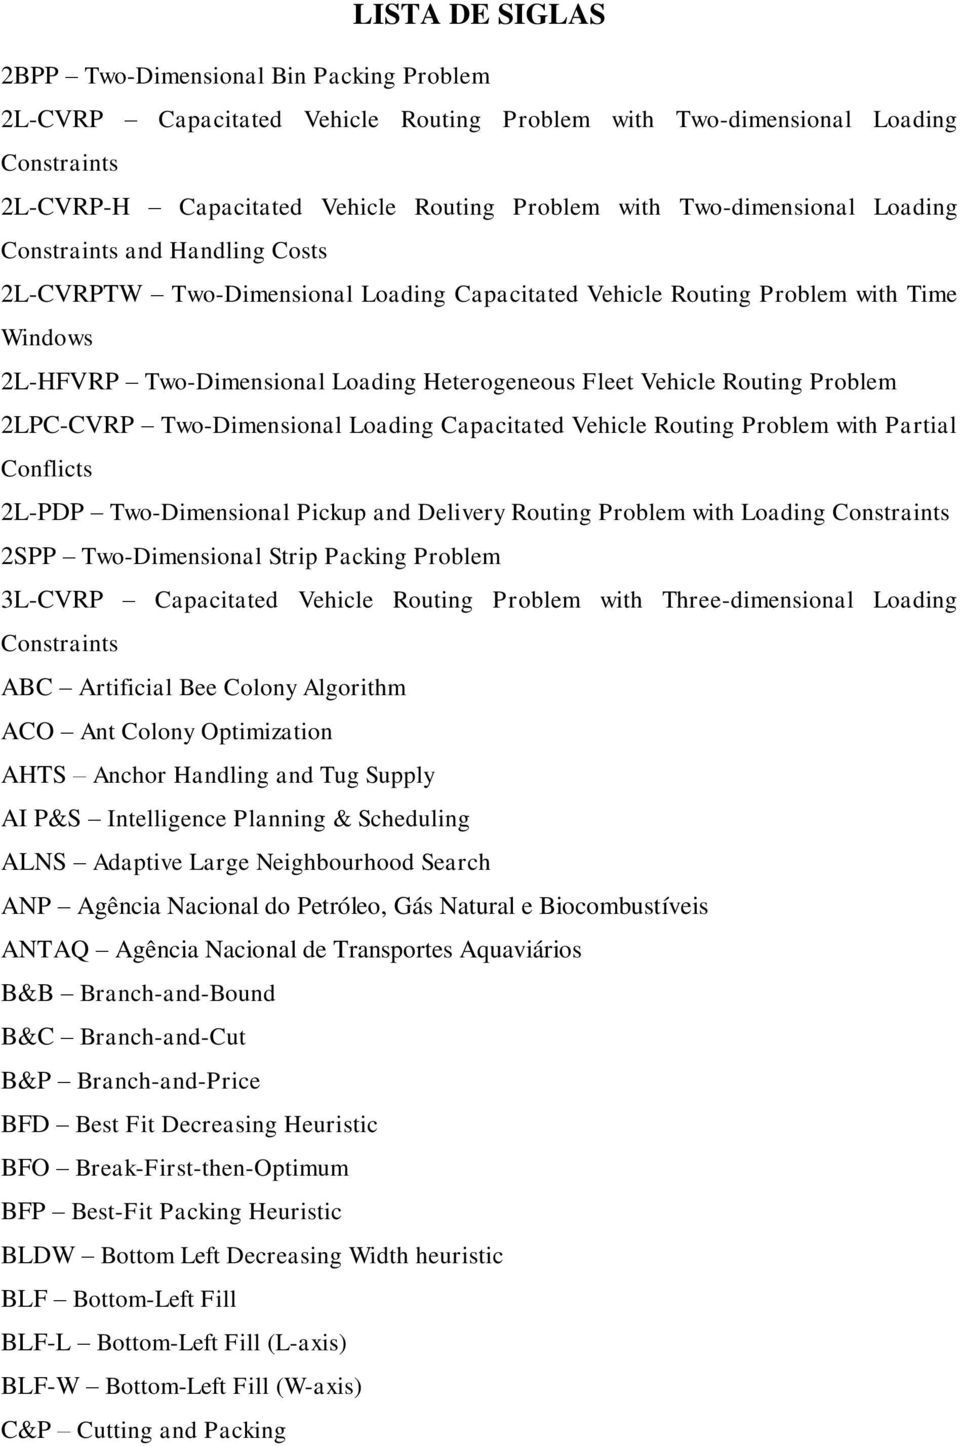 Vehicle Routing Problem 2LPC-CVRP Two-Dimensional Loading Capacitated Vehicle Routing Problem with Partial Conflicts 2L-PDP Two-Dimensional Pickup and Delivery Routing Problem with Loading